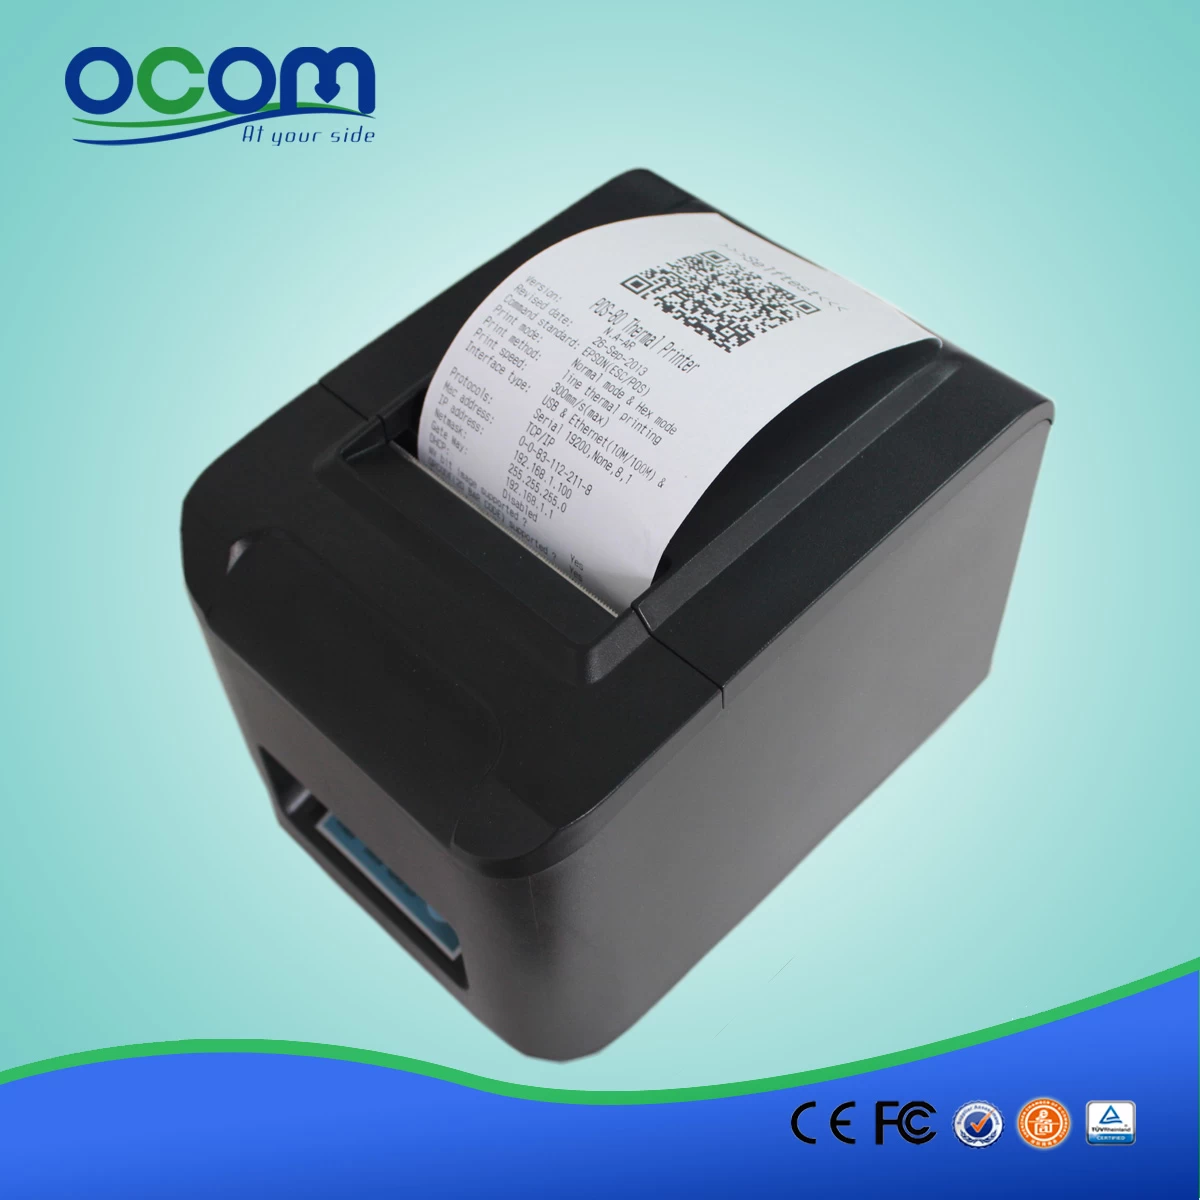 80mm High Speed Pos Thermal Receipt Printer with auto cutter